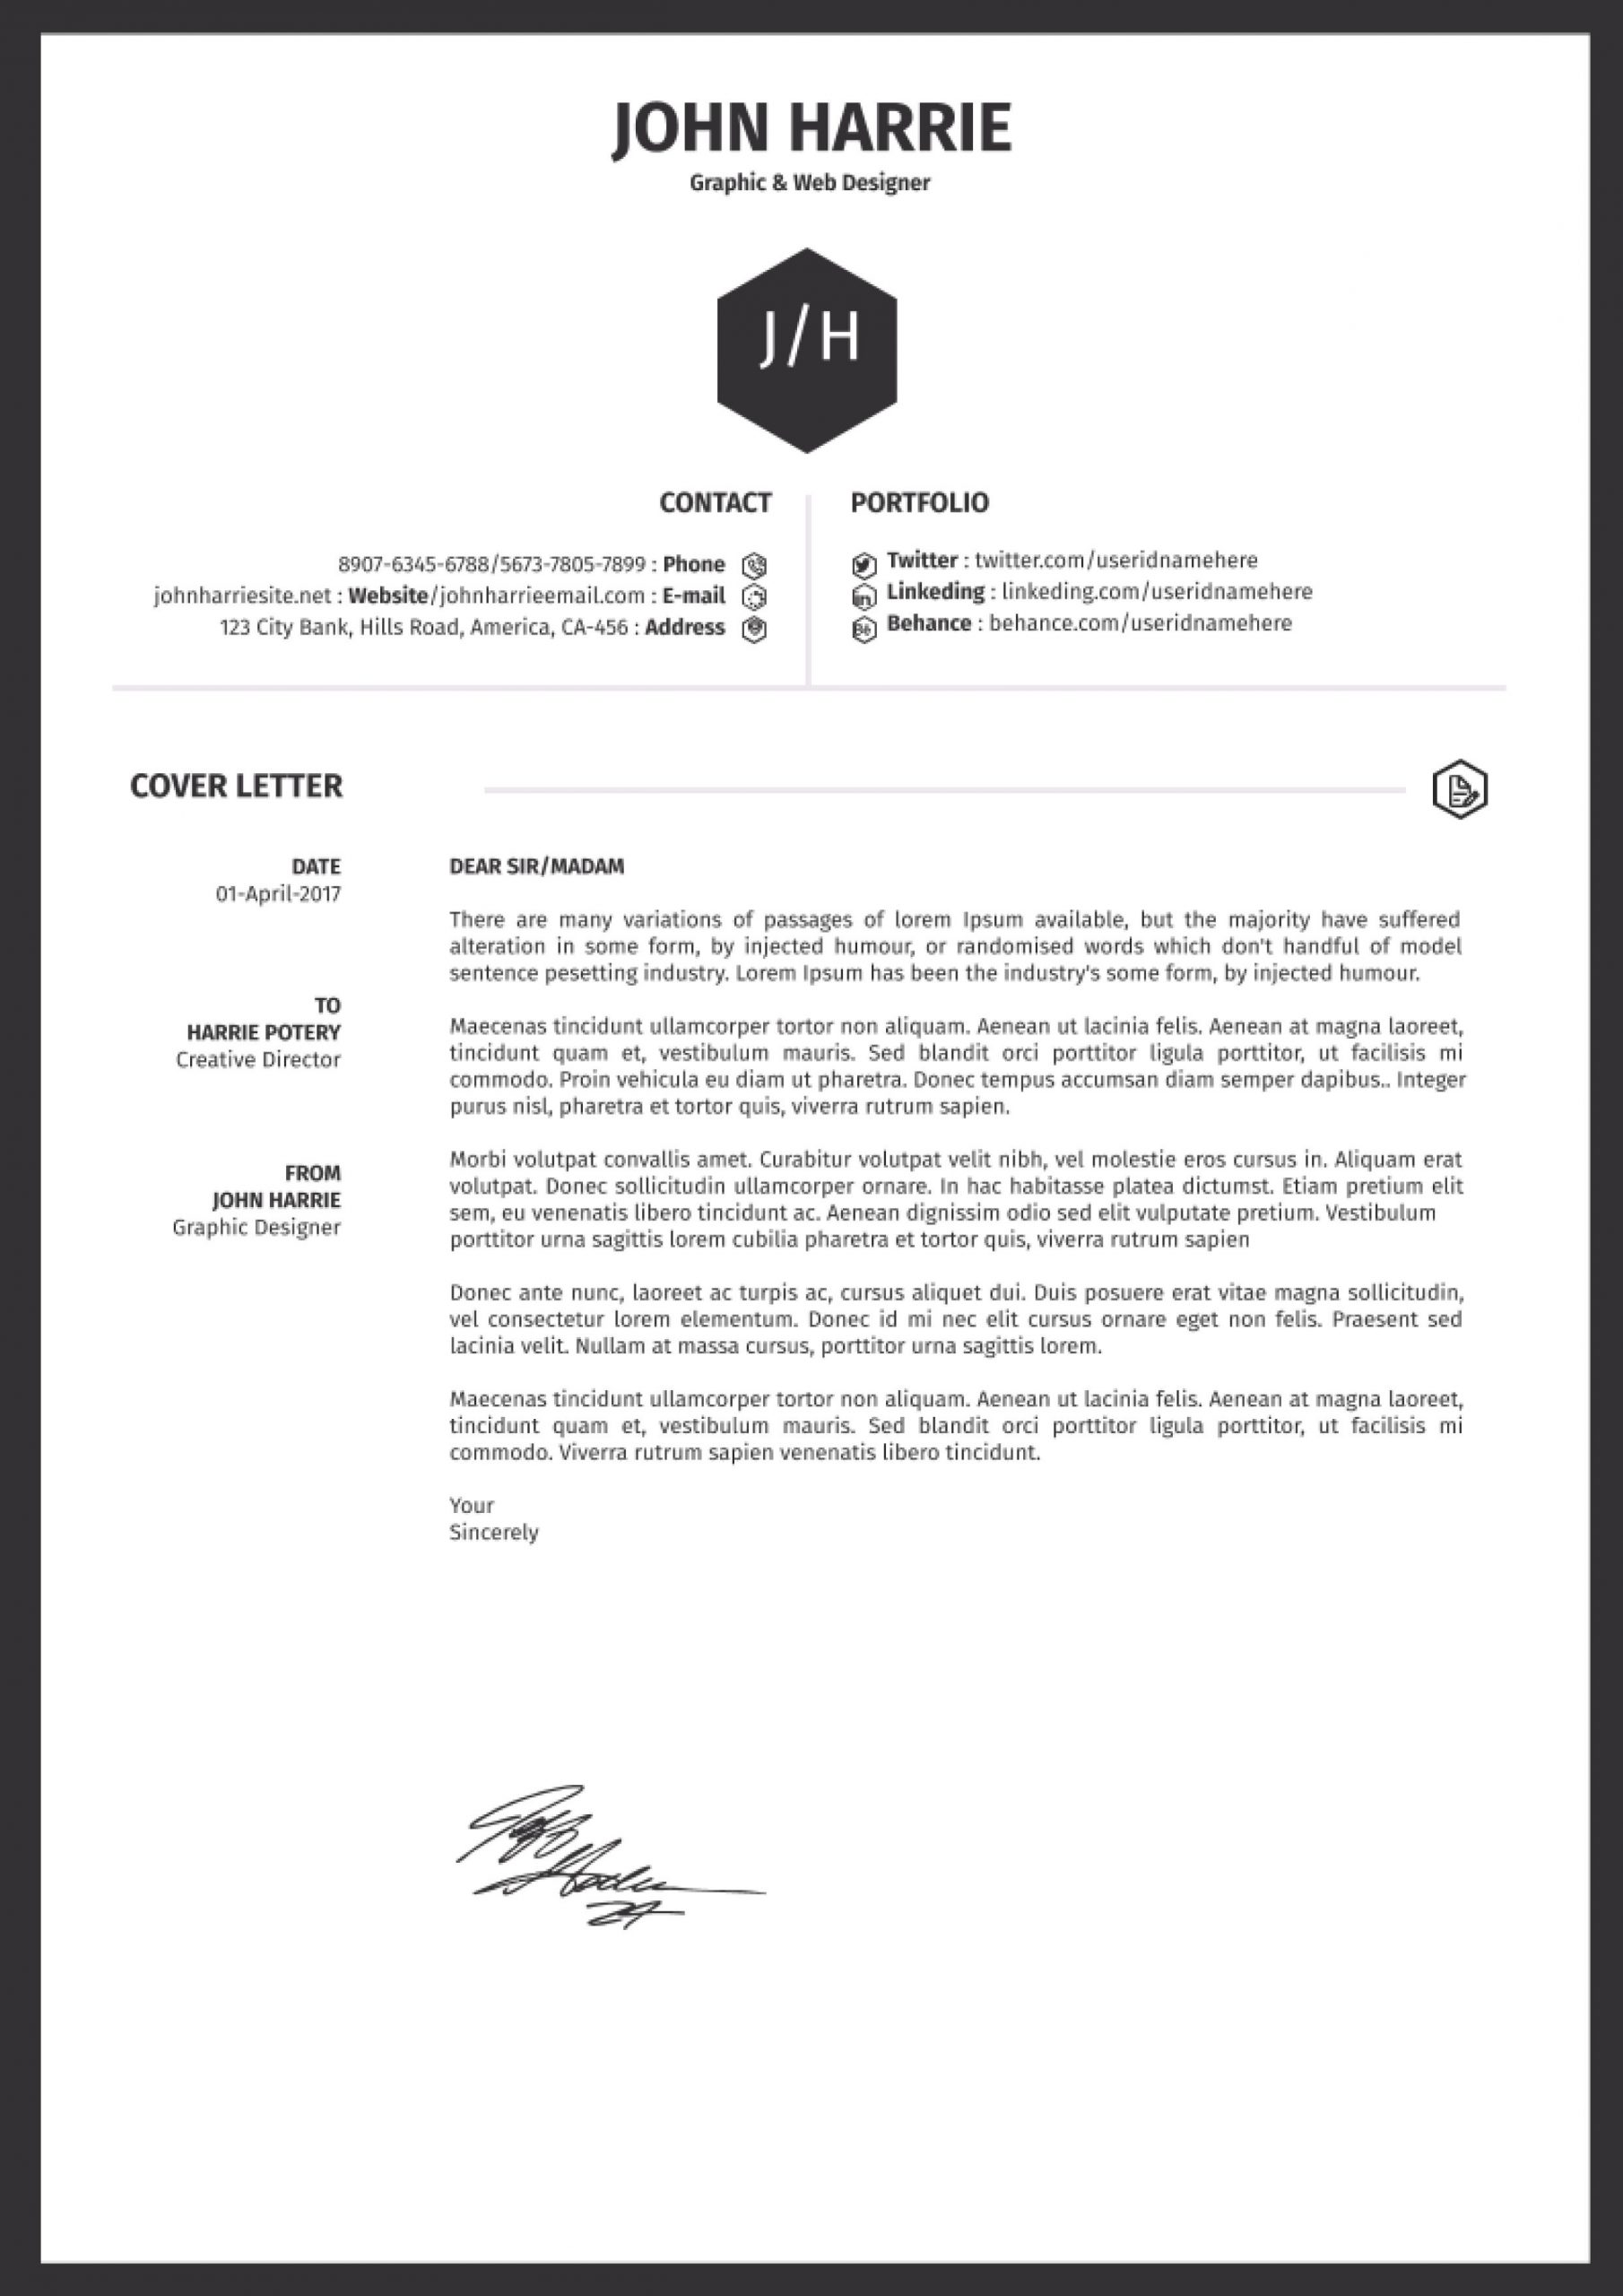 Cover Letter Design Template 13 Free Cover Letter Templates for Microsoft Word Docx and